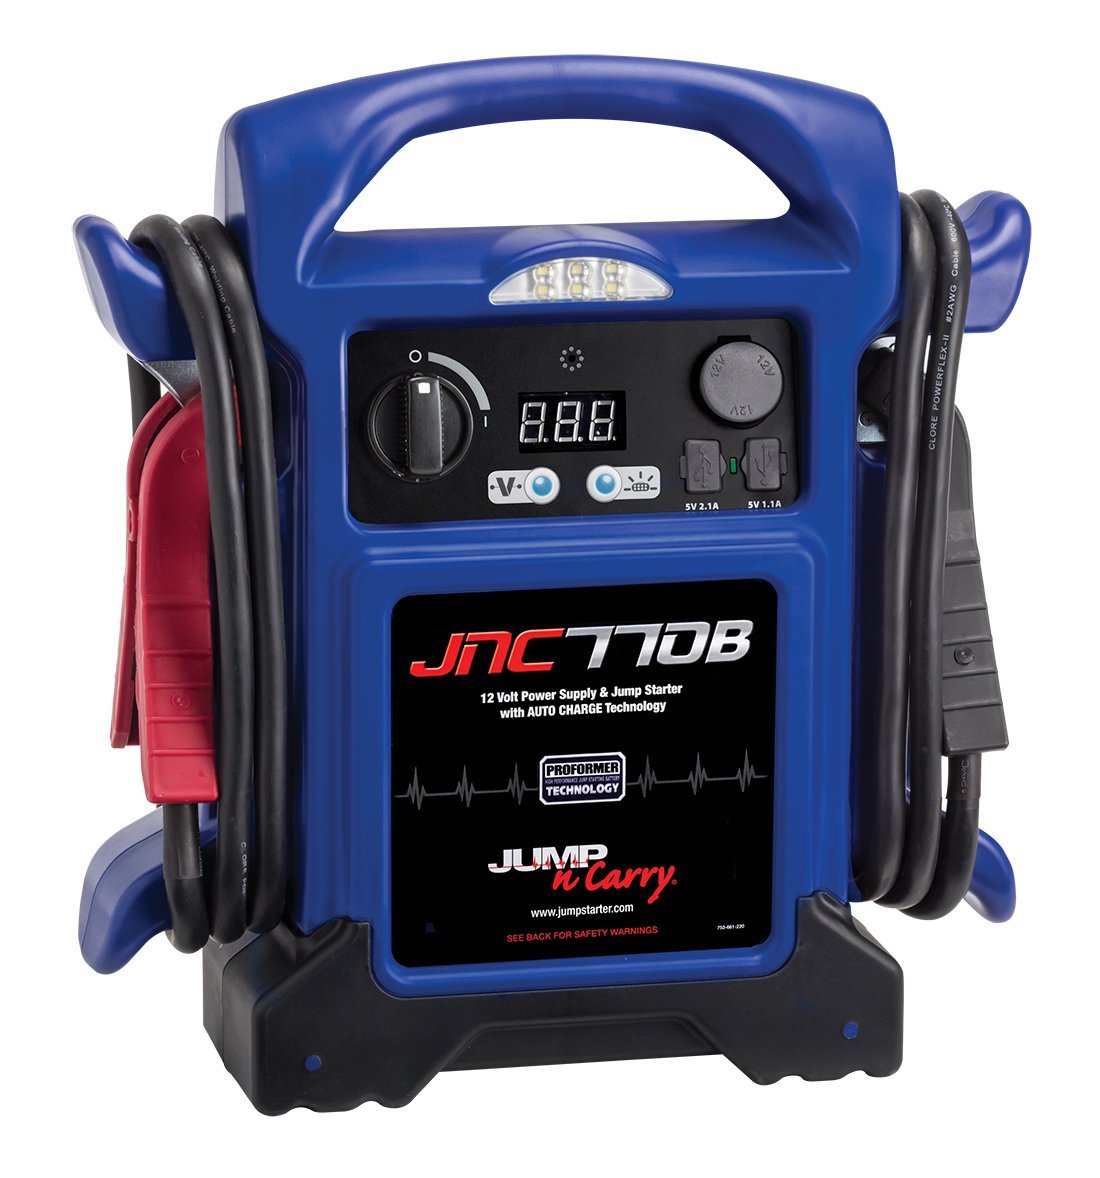 20% off Jump-N-Carry Power Sources! Today only!